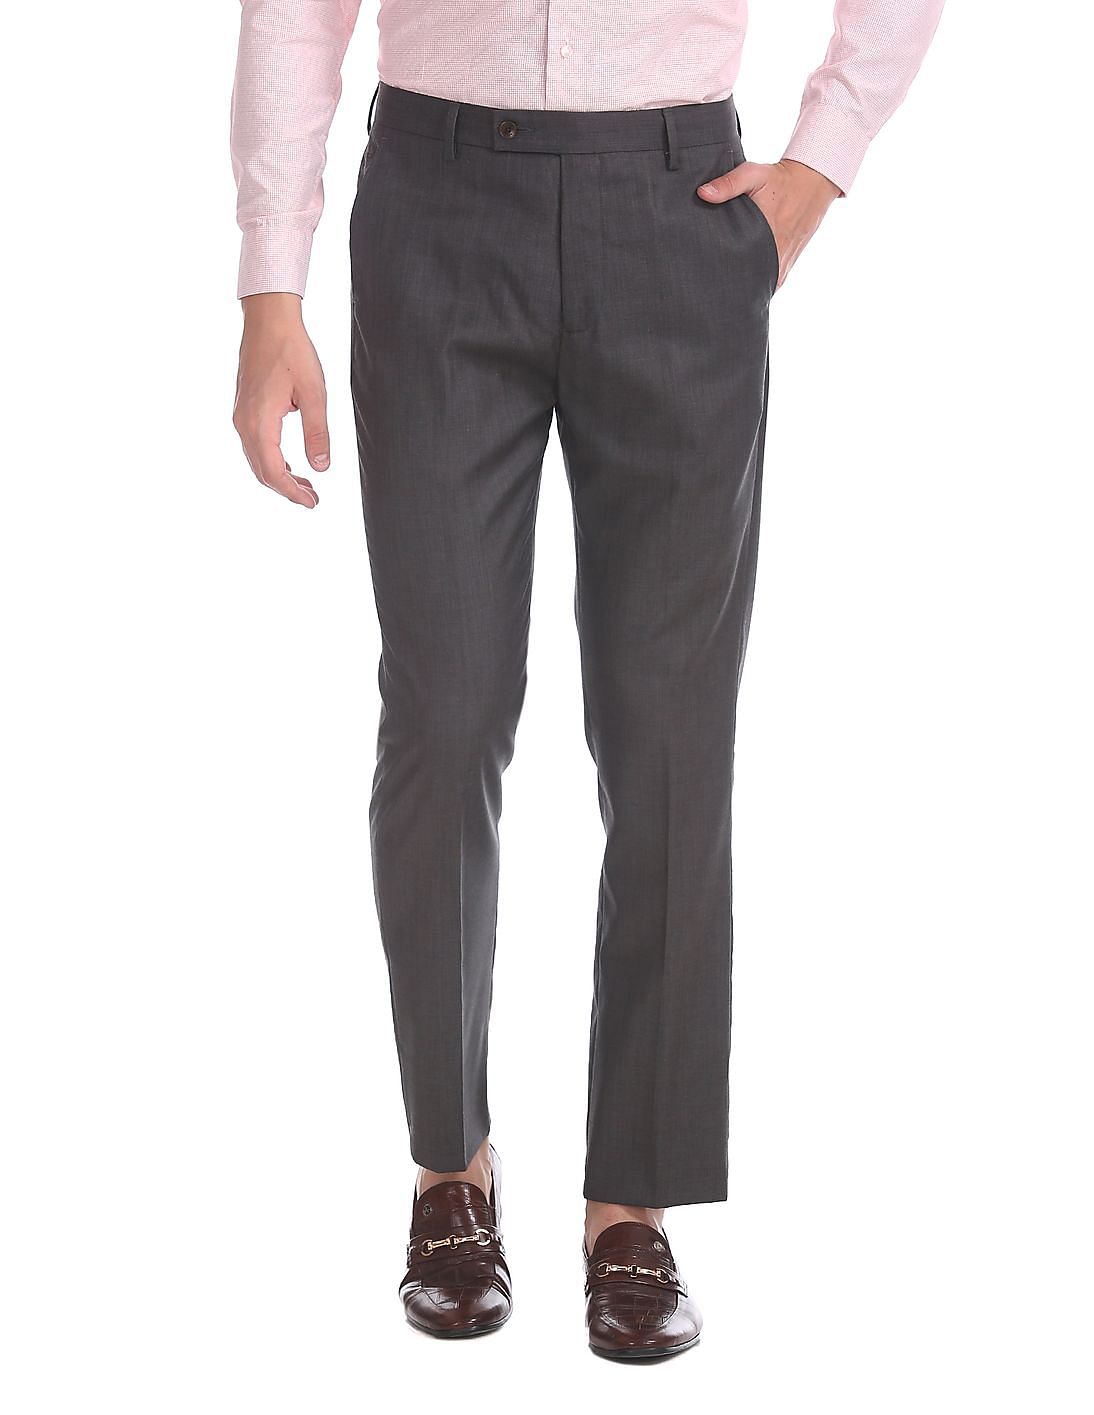 Buy Arrow Tapered Fit Solid Trousers - NNNOW.com